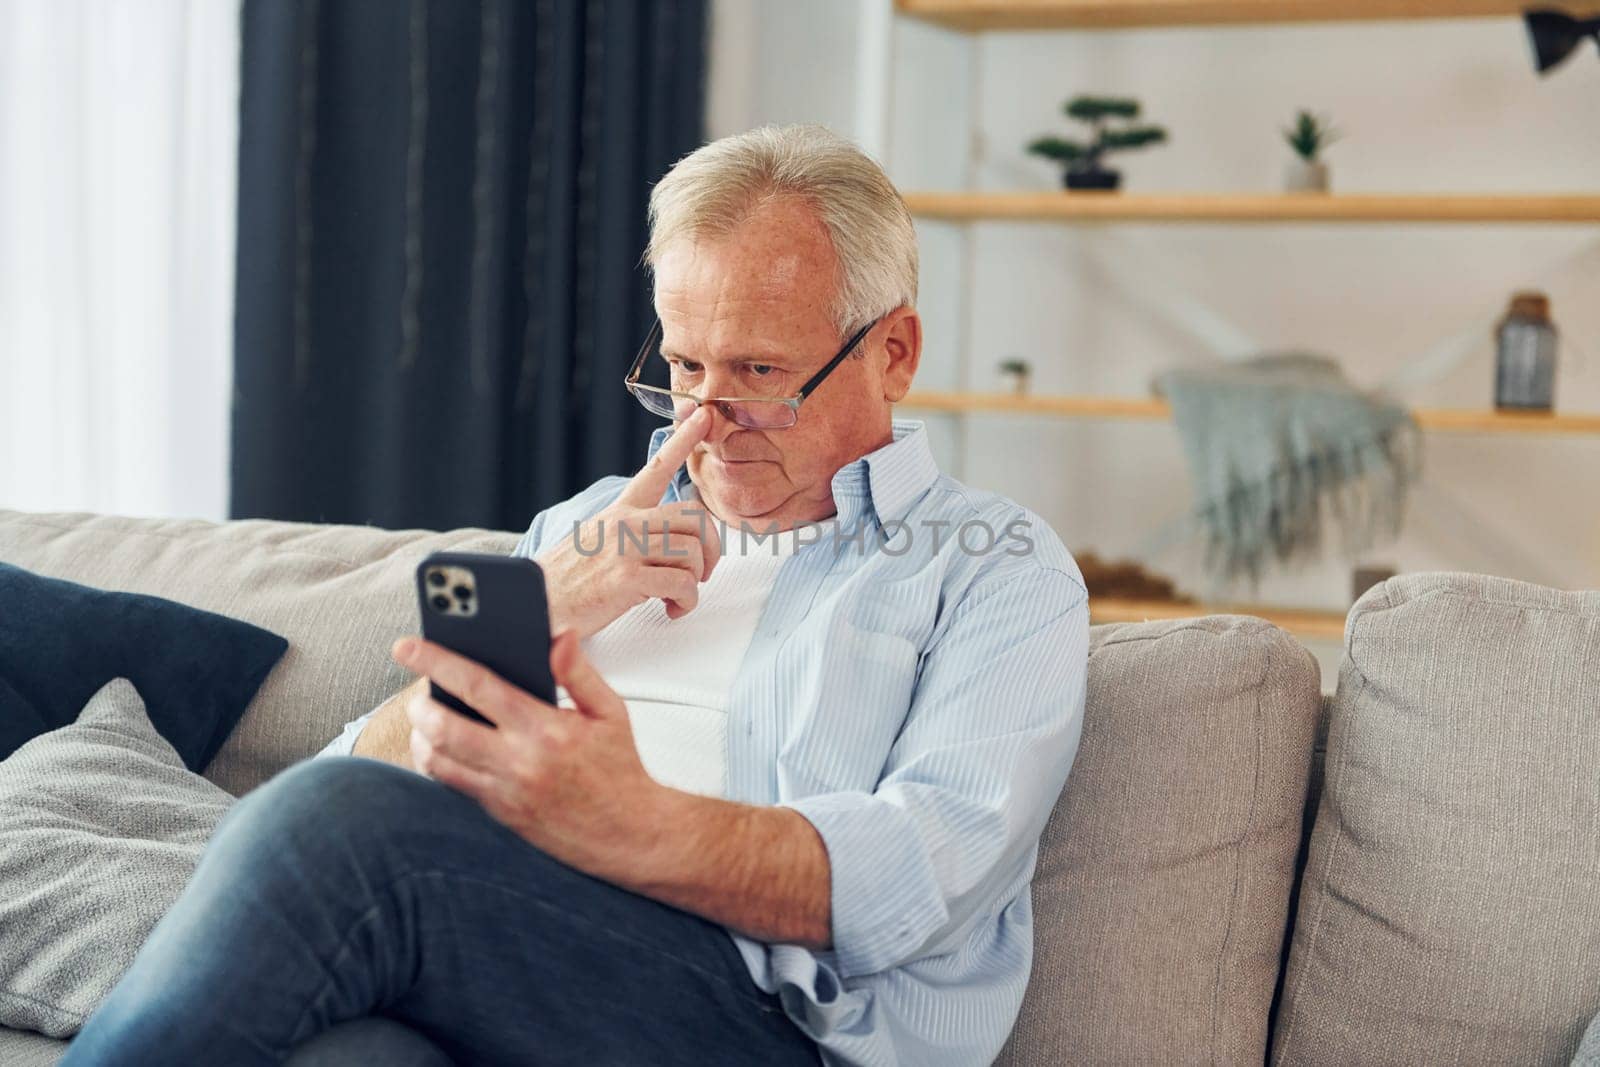 Sitting with smartphone in hands. Senior man in nice clothes is at home.